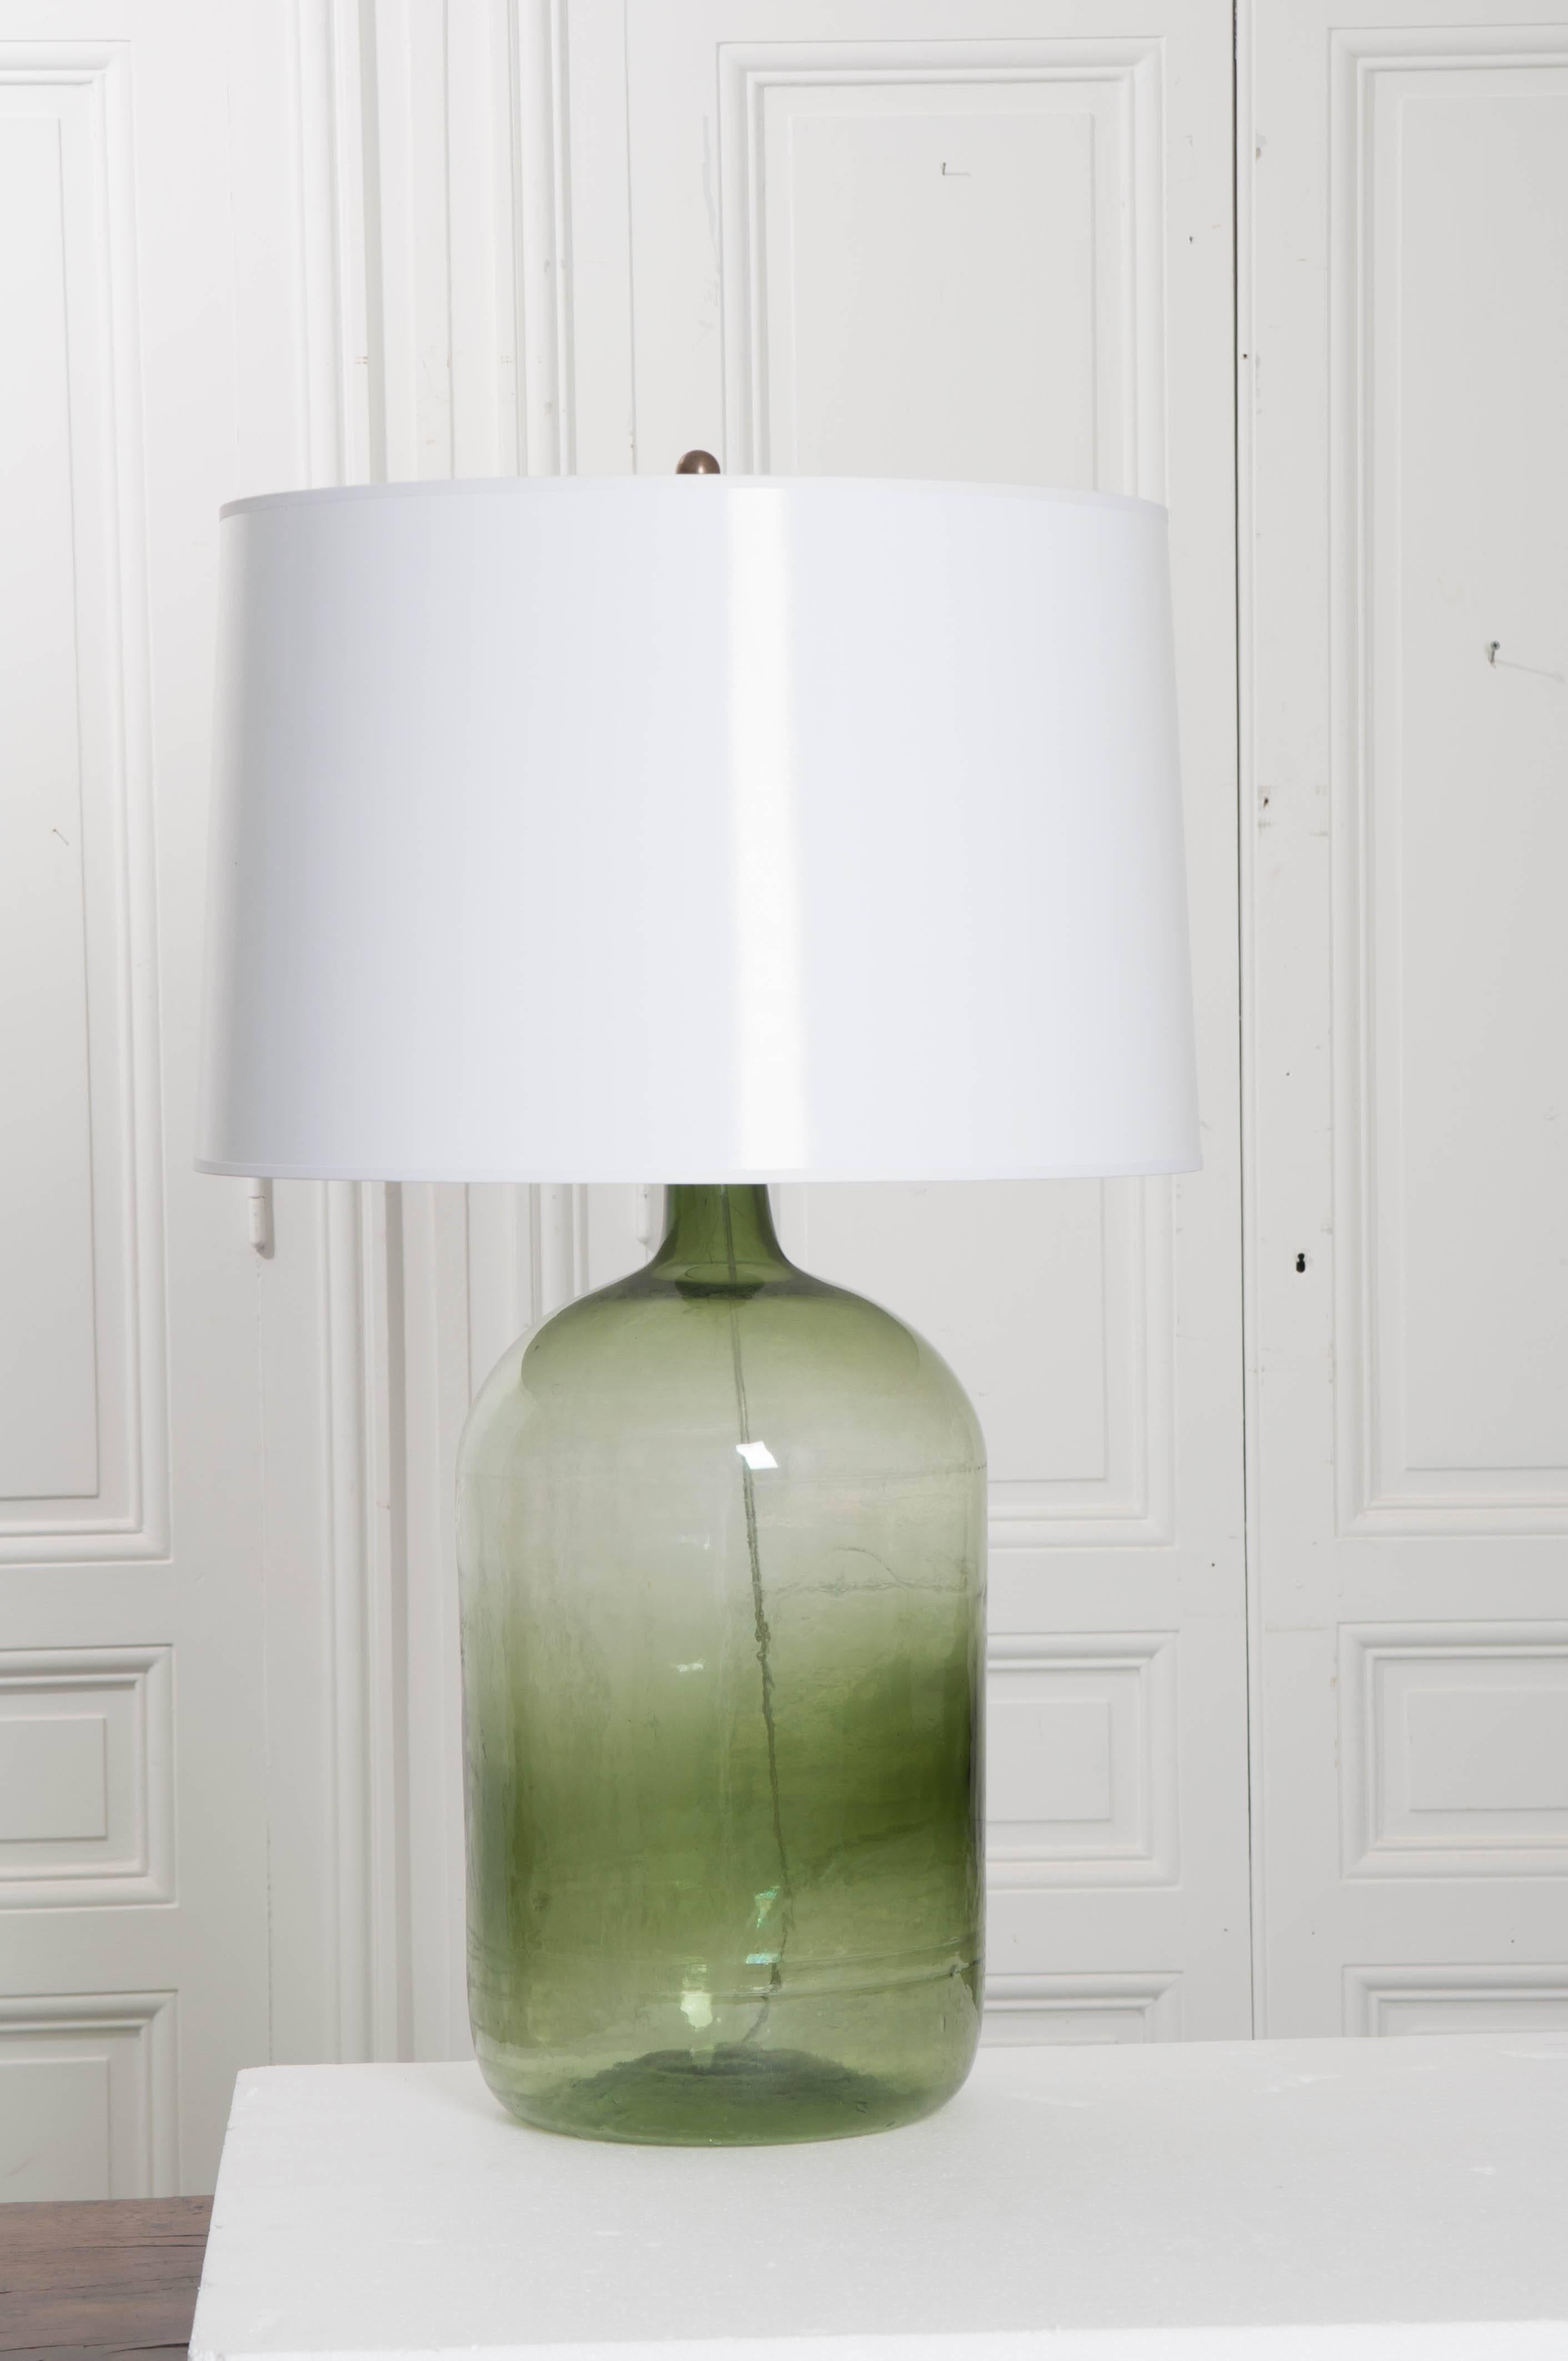 A wonderful antique green-glass wine keg, or “demijohn”, that has recently been made into a fantastic table lamp. Once used to store and transport wine, today this large green bottle provides the base for a most attractive light fixture. The blown